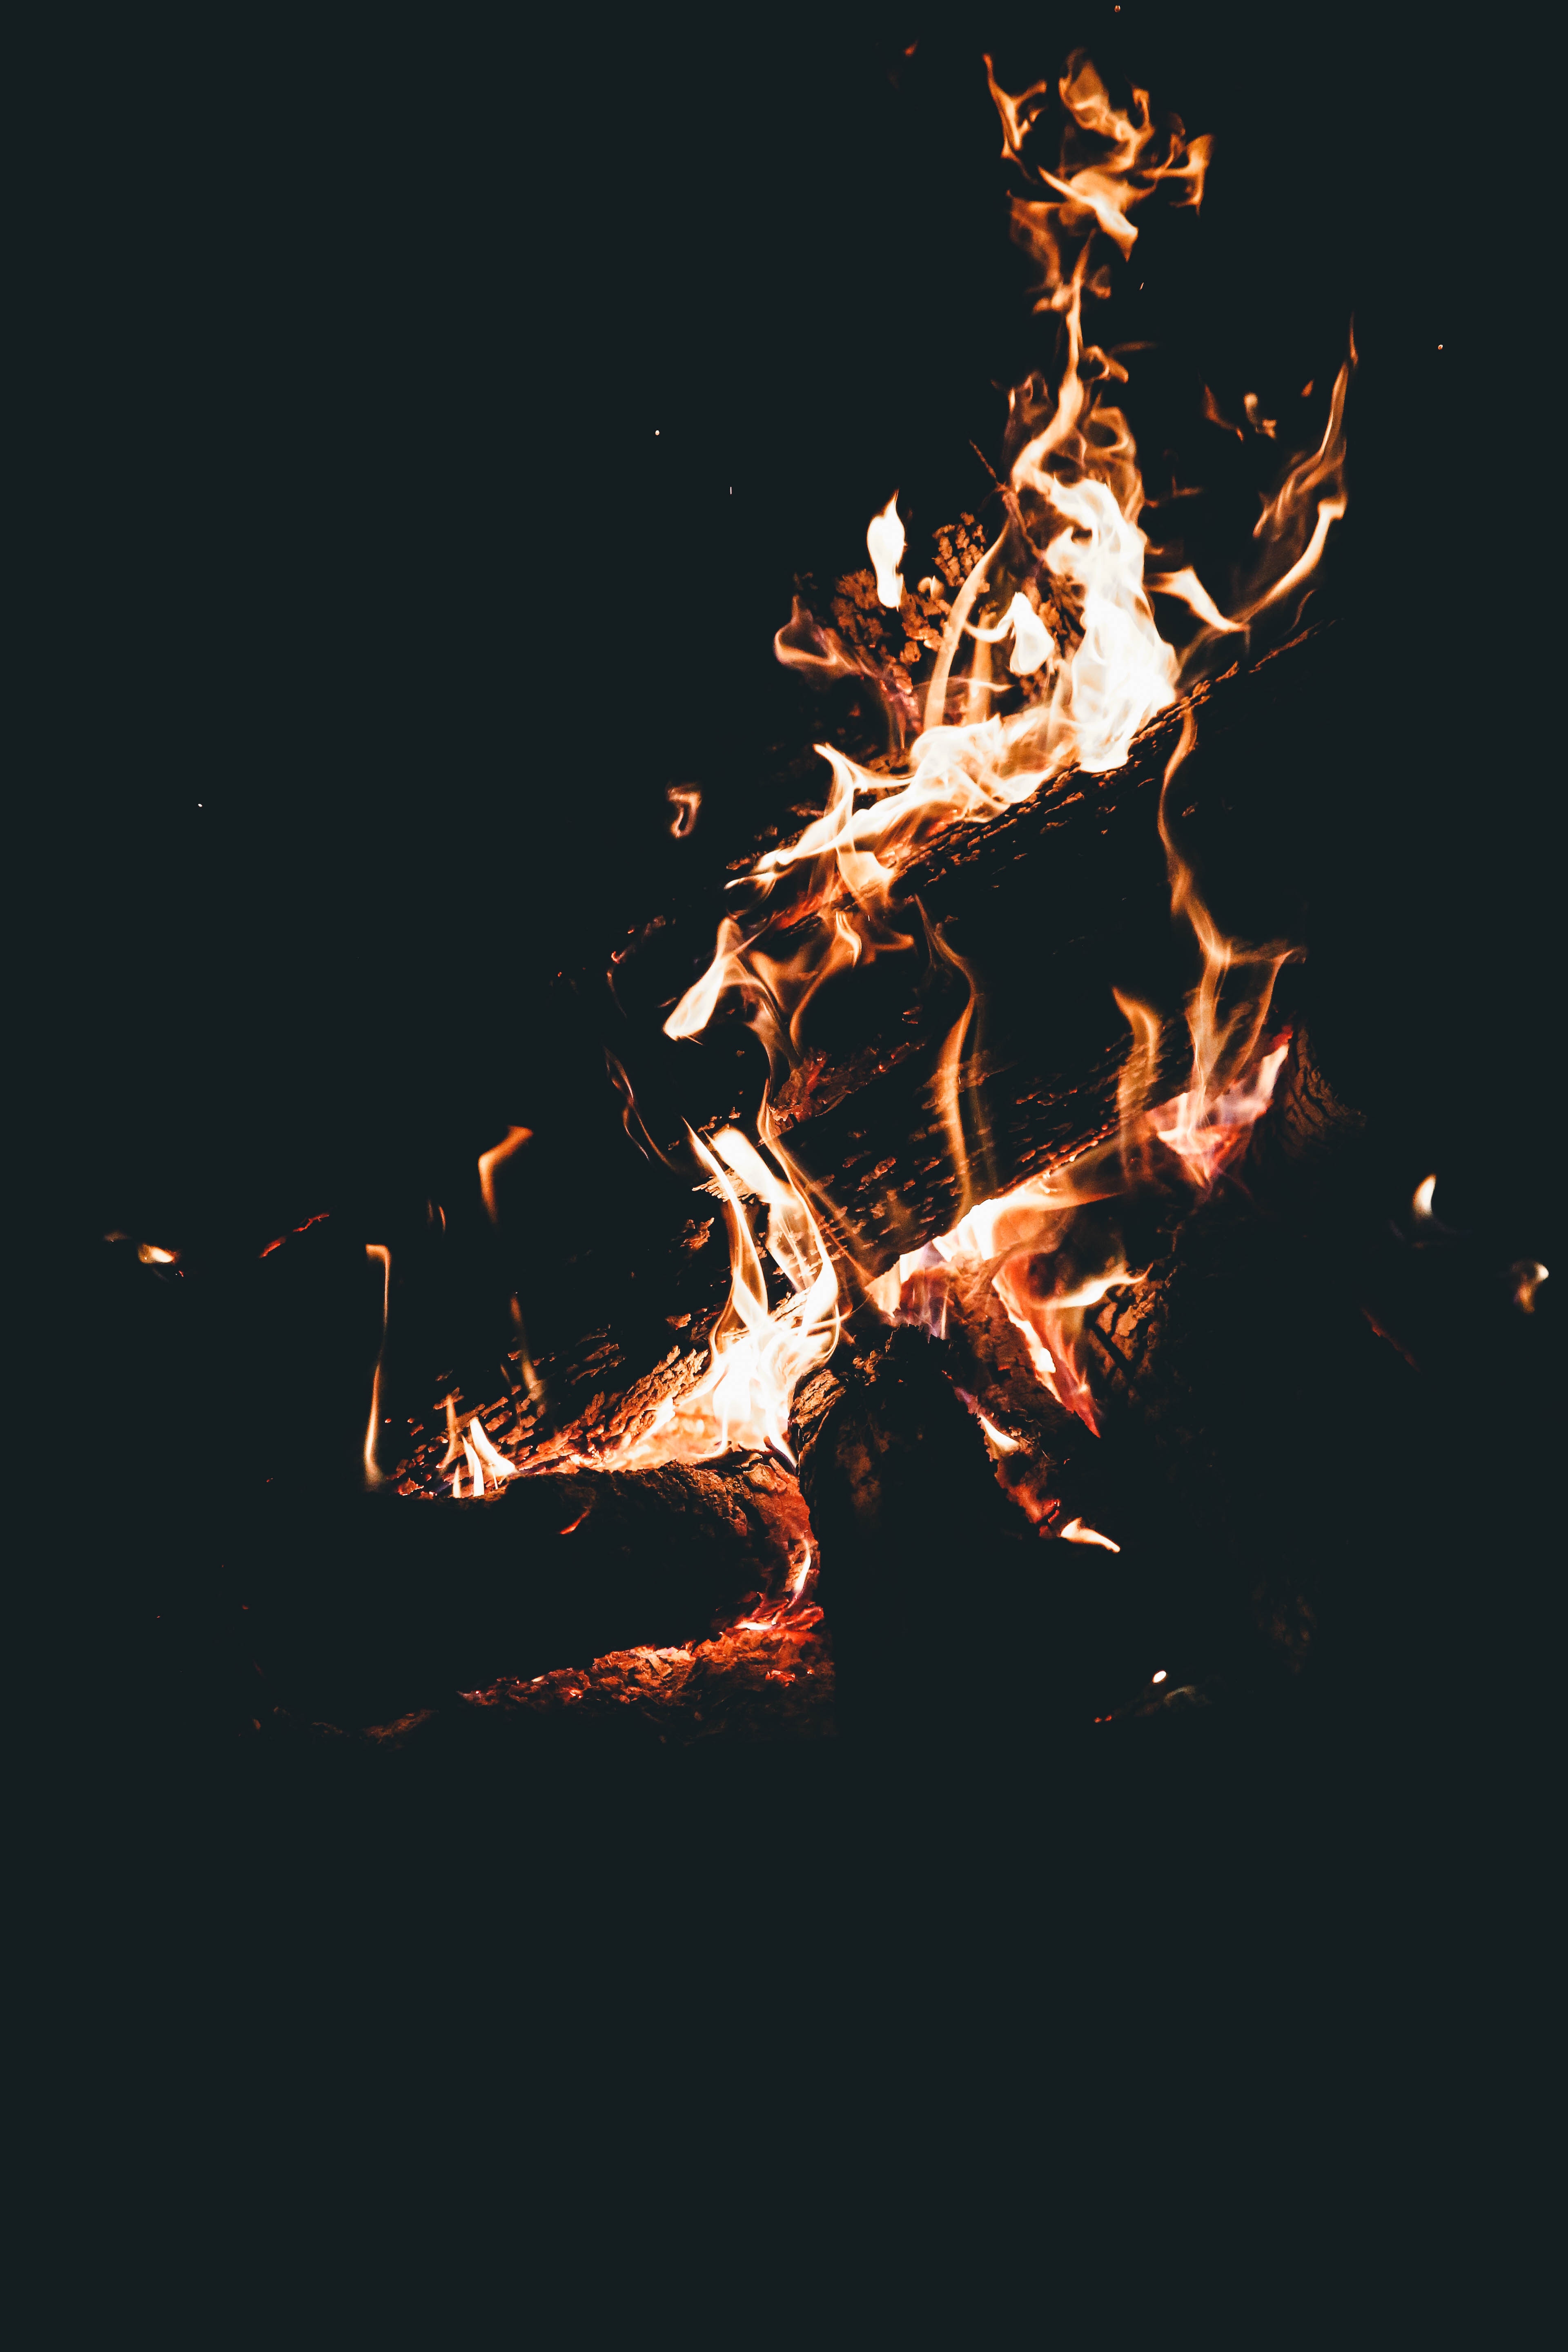 combustion, flame, bonfire, dark, fire, firewood, camping, campsite